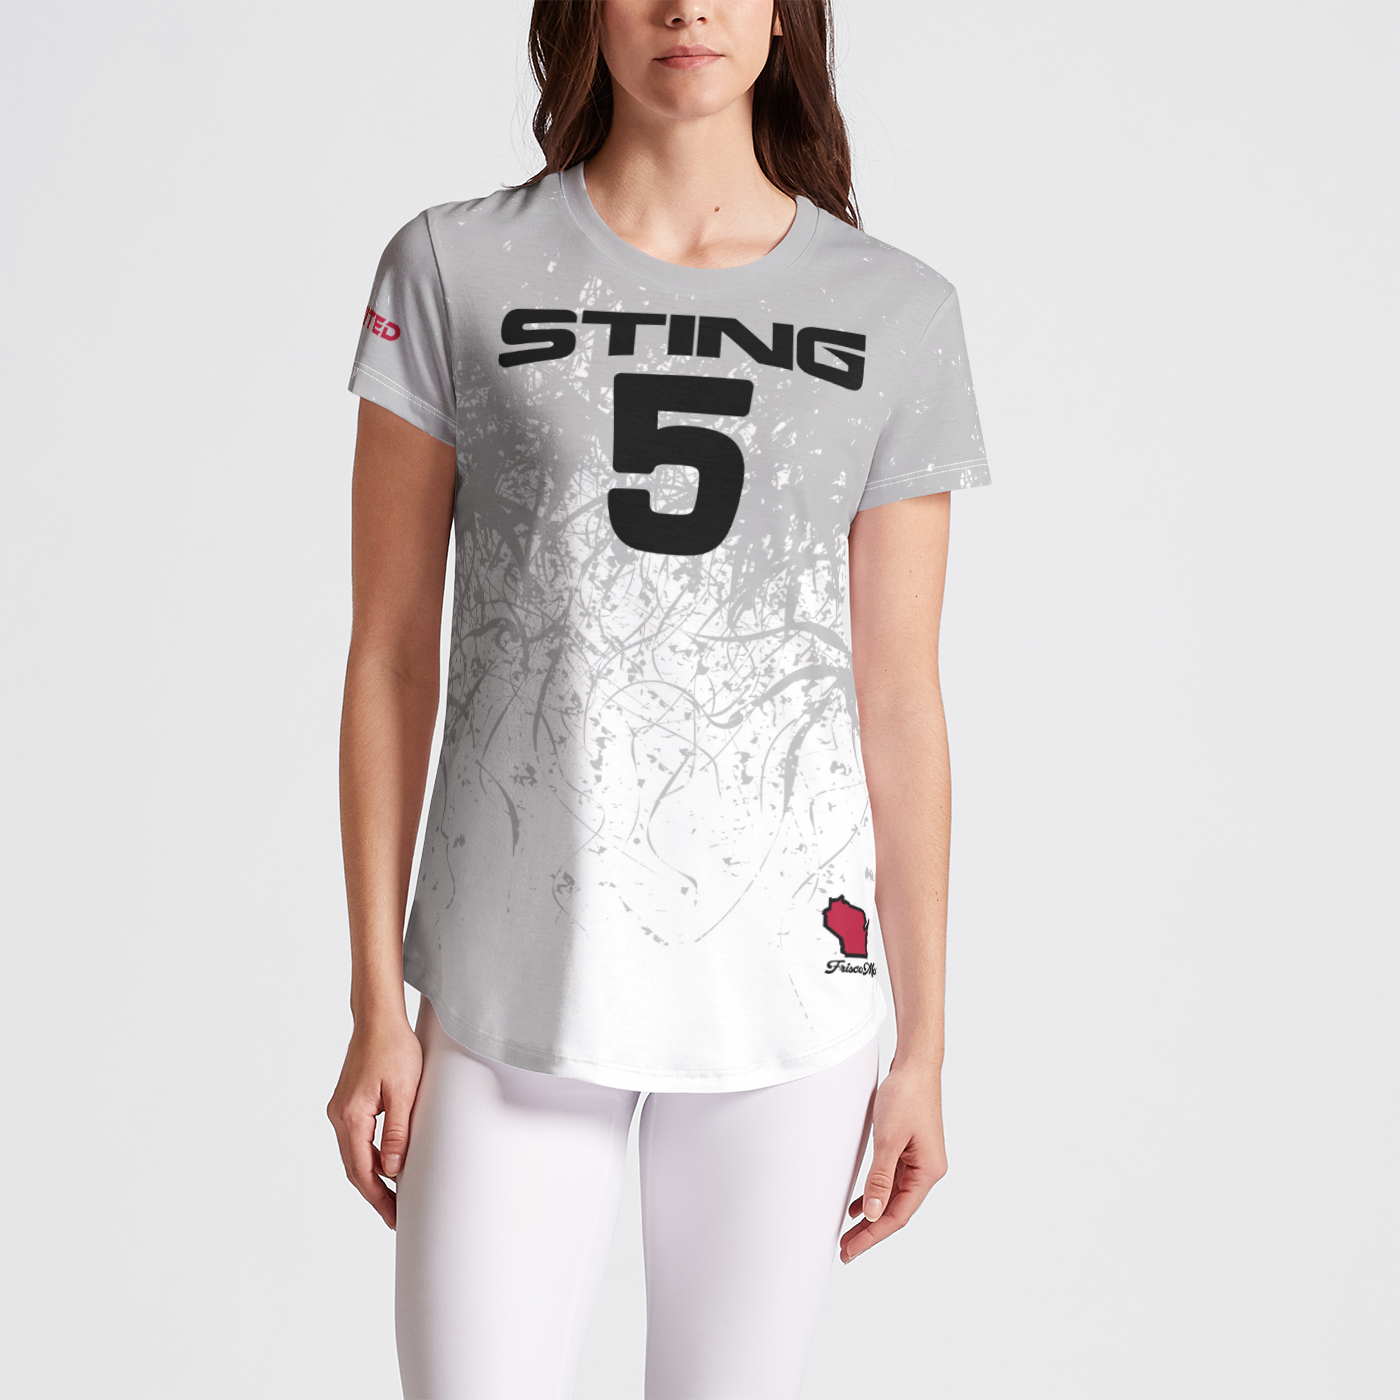 Sting United Tentacles Jersey